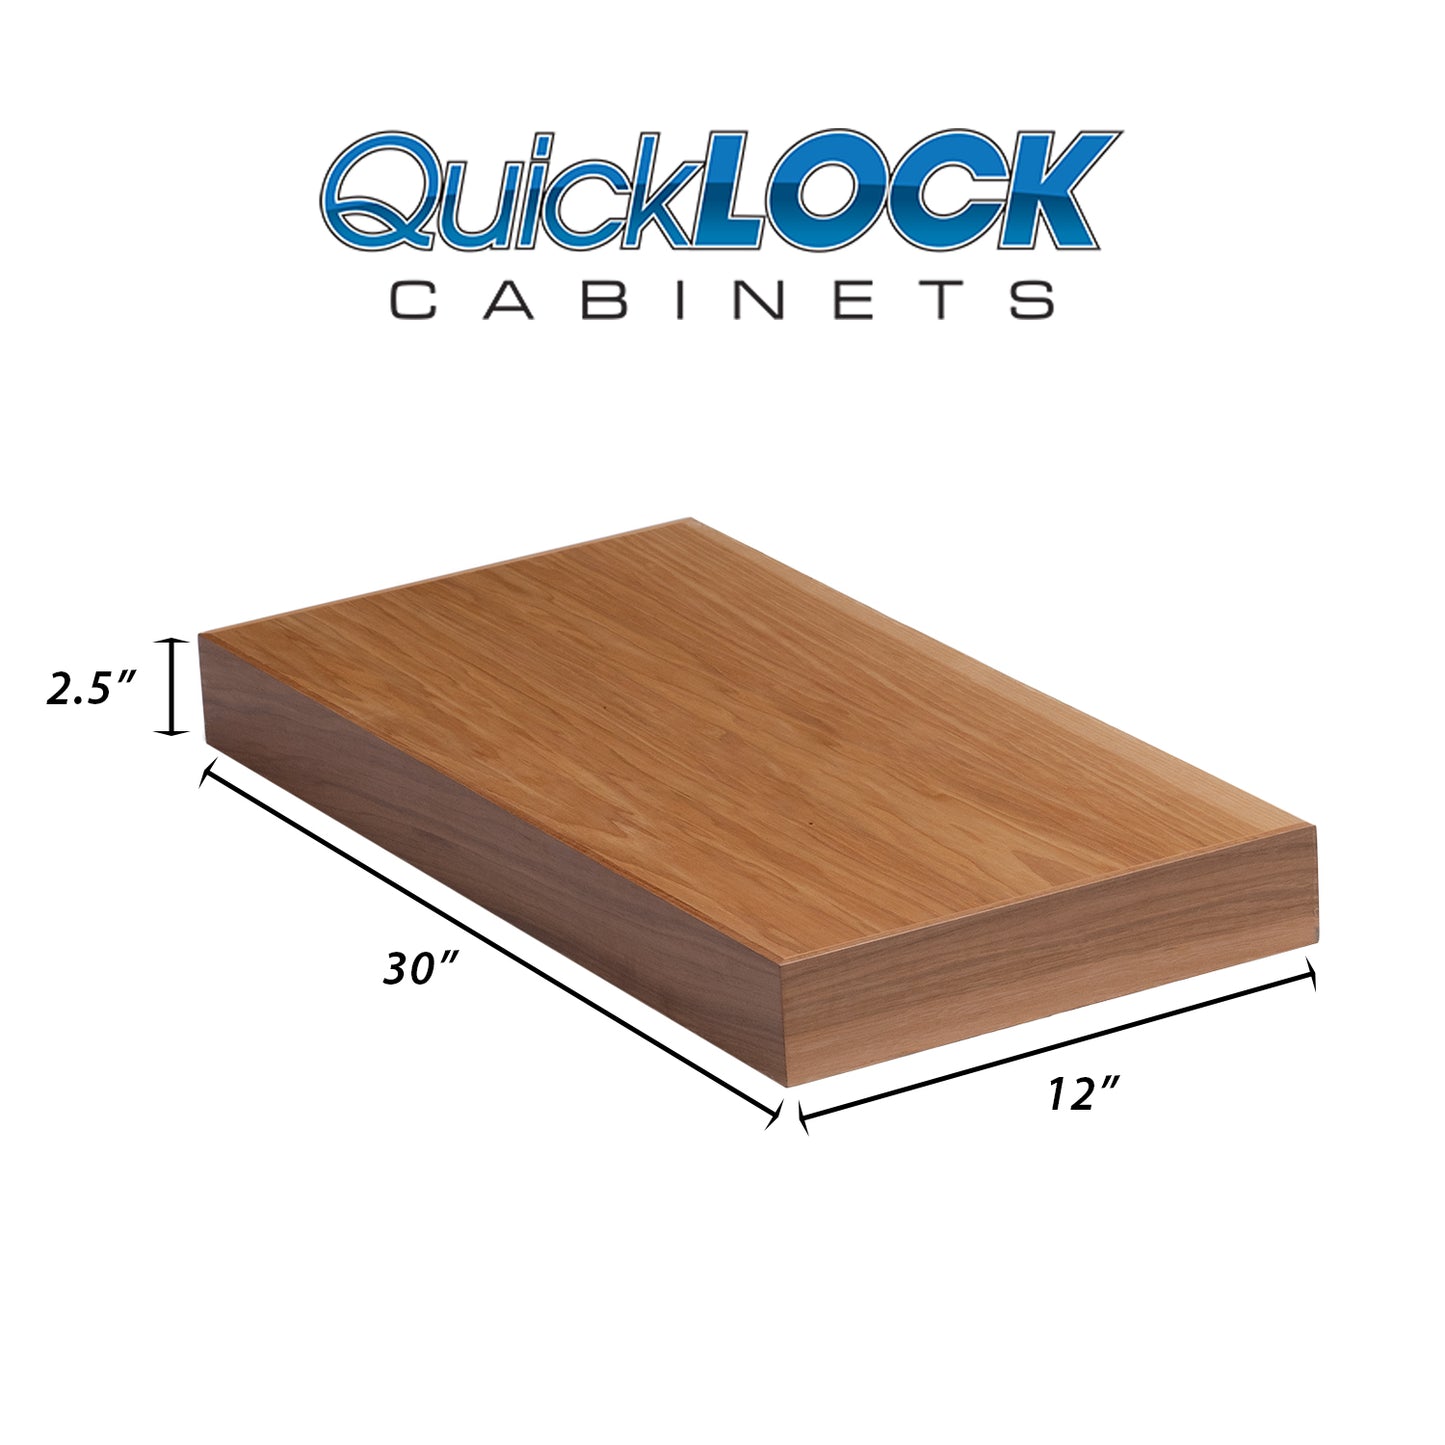 Quicklock Cabinets Floating Shelves | 2.5" Thick | Rustic Hickory, 12" D x 30" W x 2.5" H | American Made | Hardwood Bracket | Complete Shelf Unit